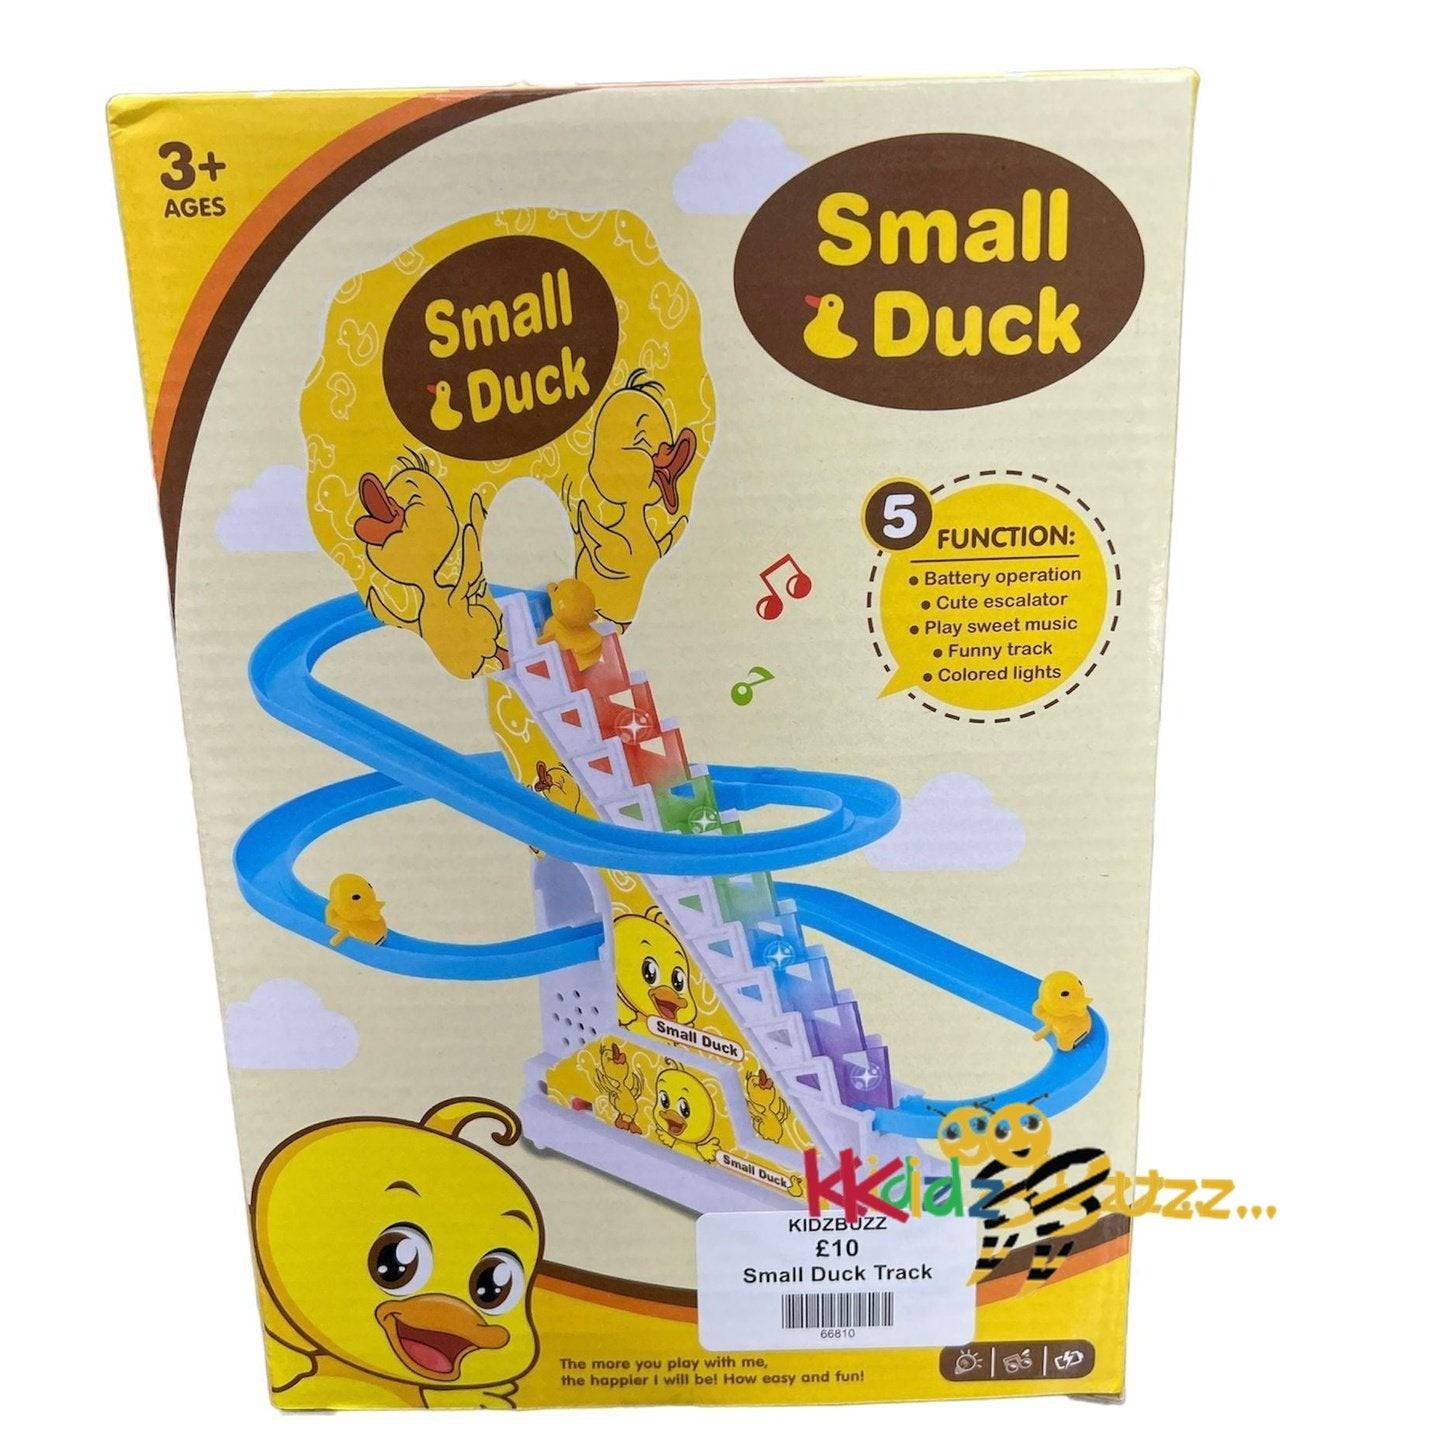 Small Duck Track Toy